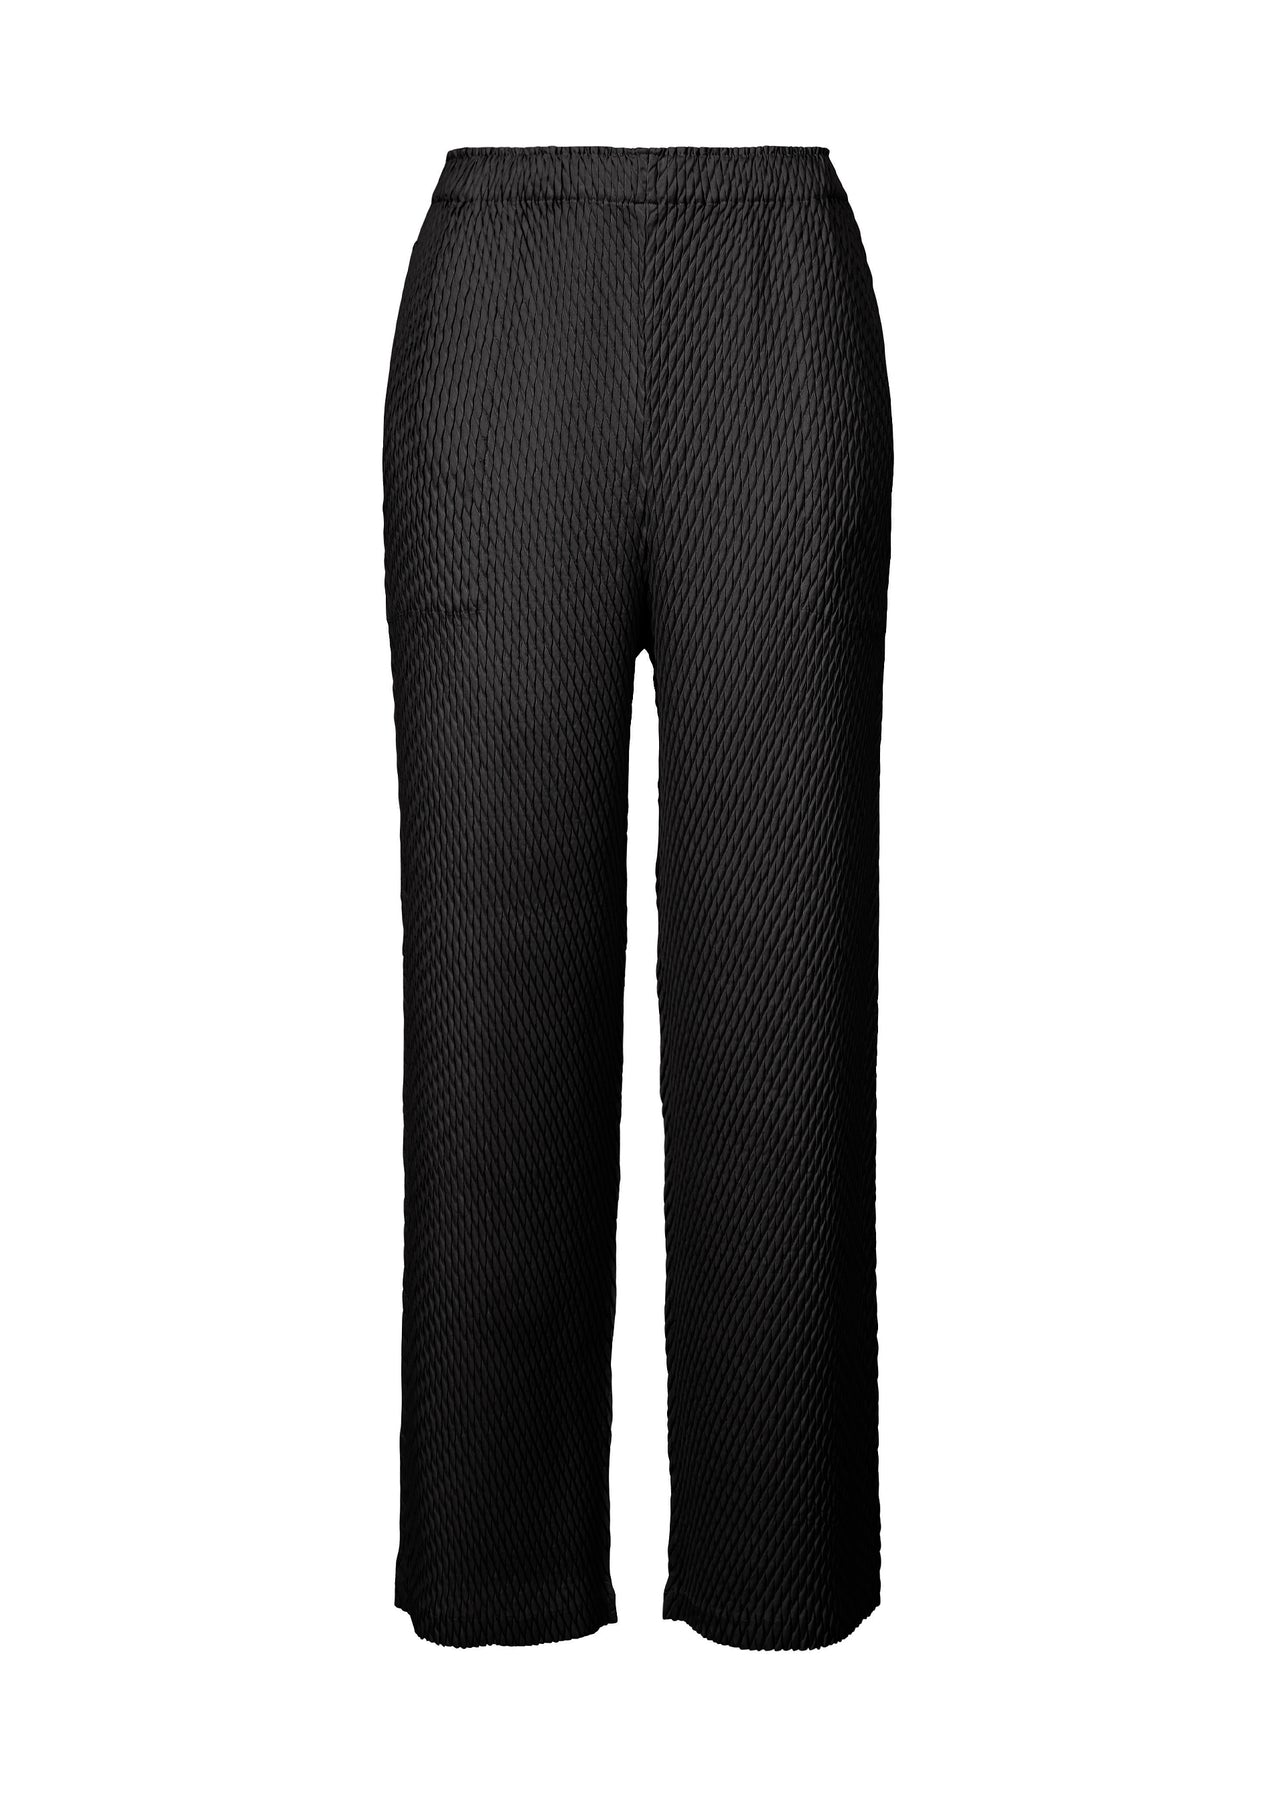 SLEEK PLEATS PANTS | The official ISSEY MIYAKE ONLINE STORE 